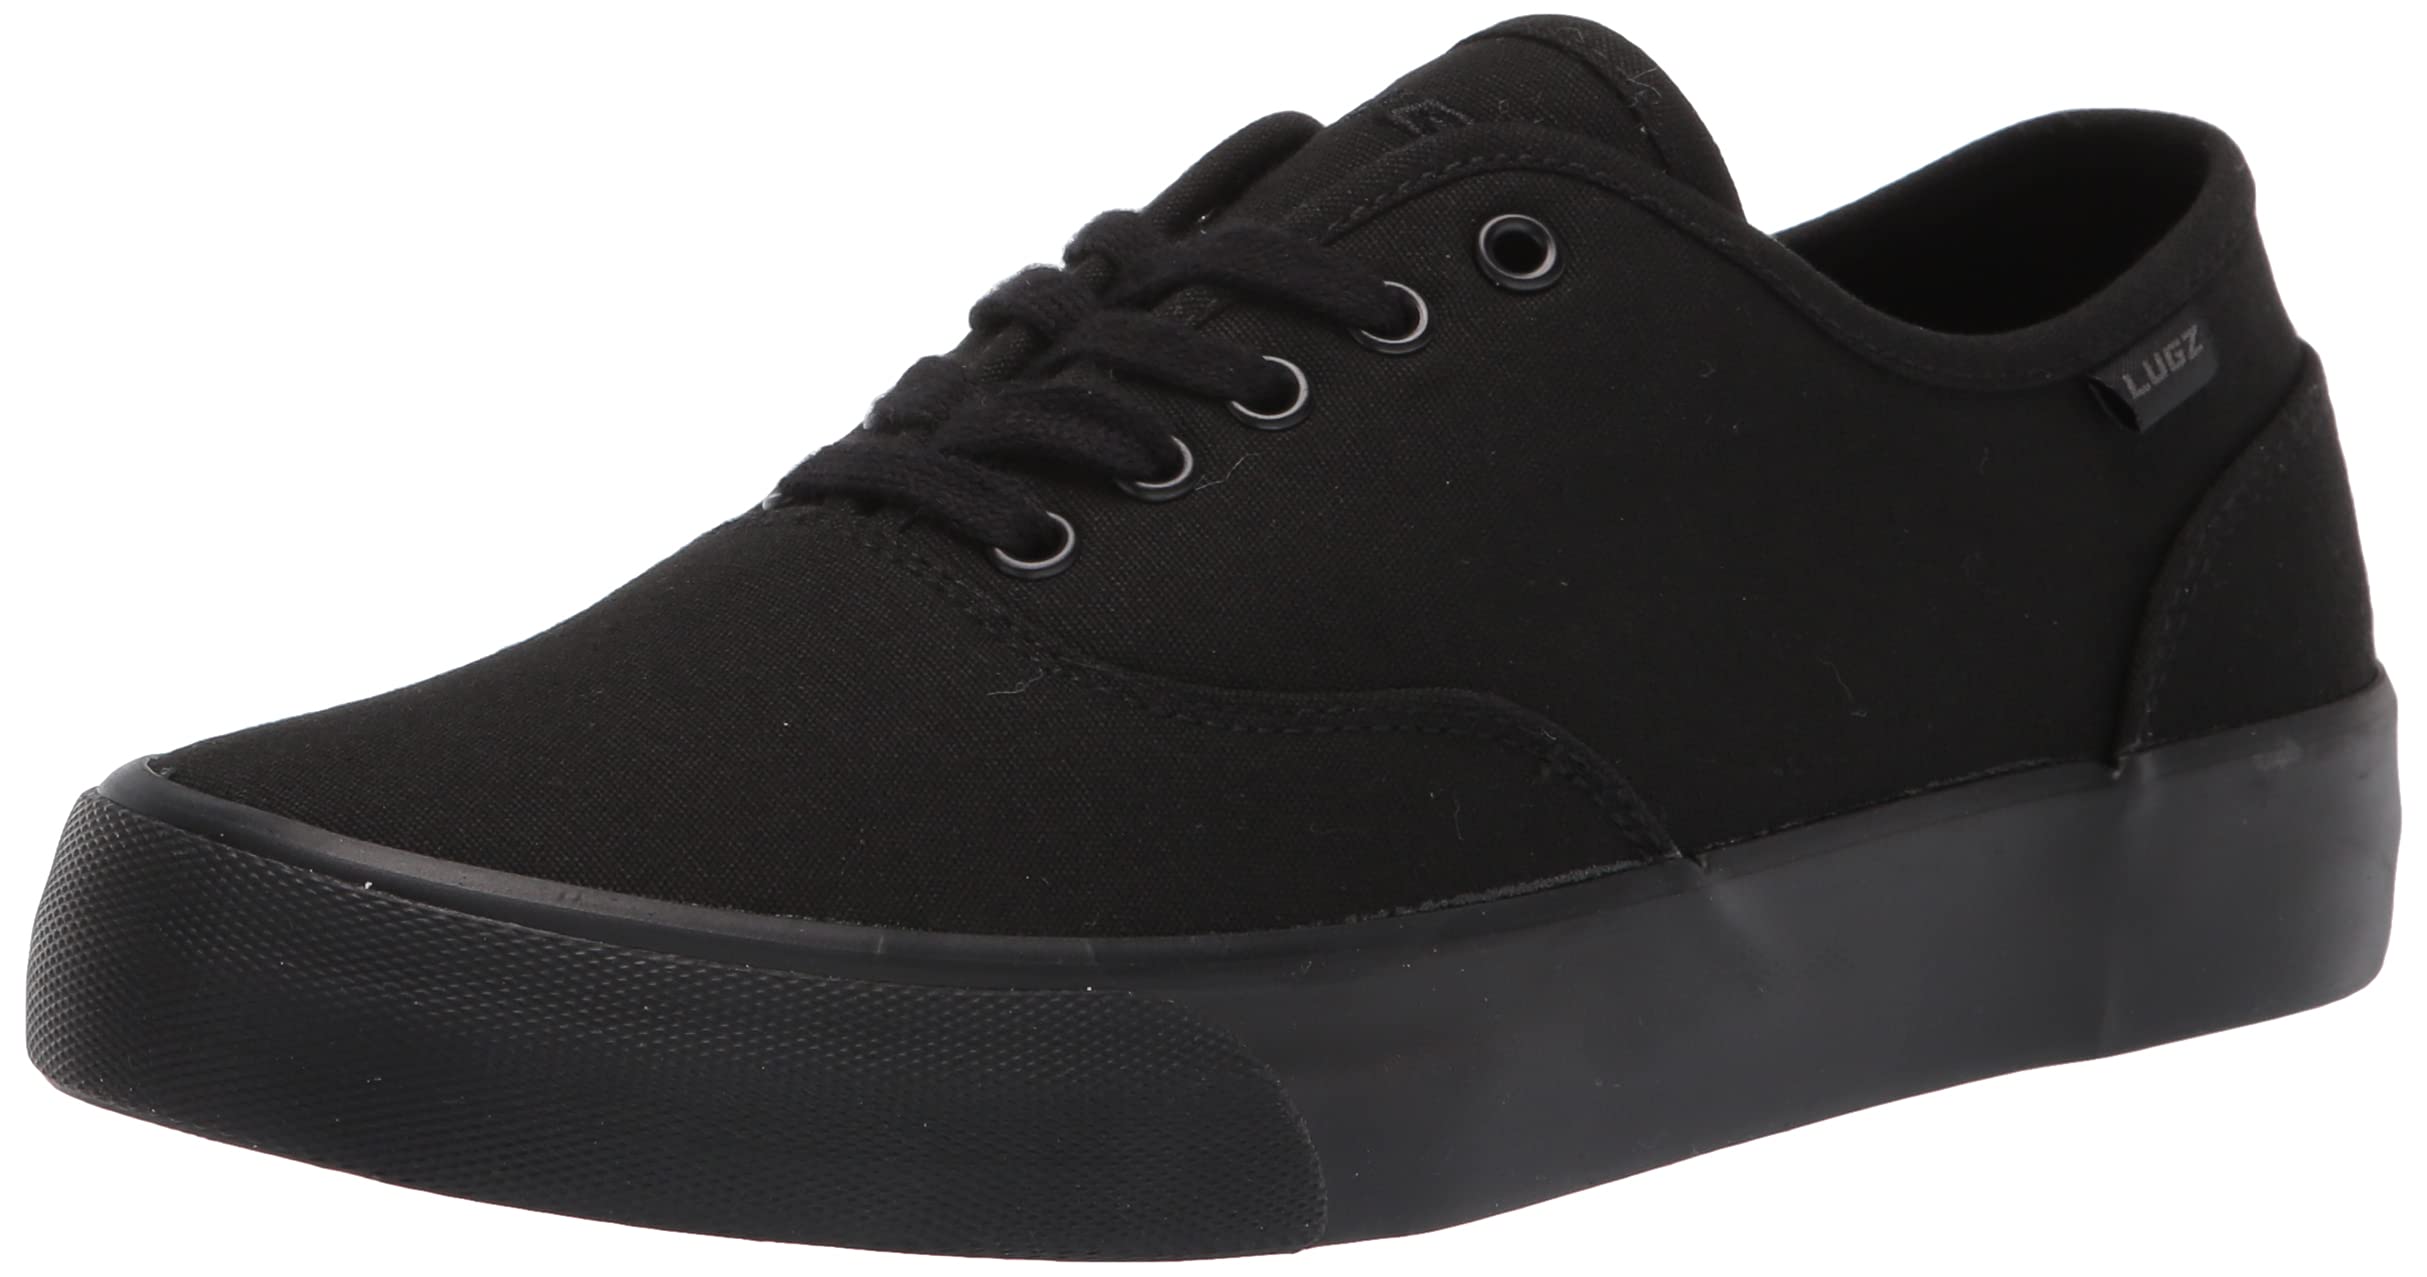 Lugz Women's Lear Shoes (Black, Size 5.5-11) $15 + Free Shipping w/ Prime or on $25+